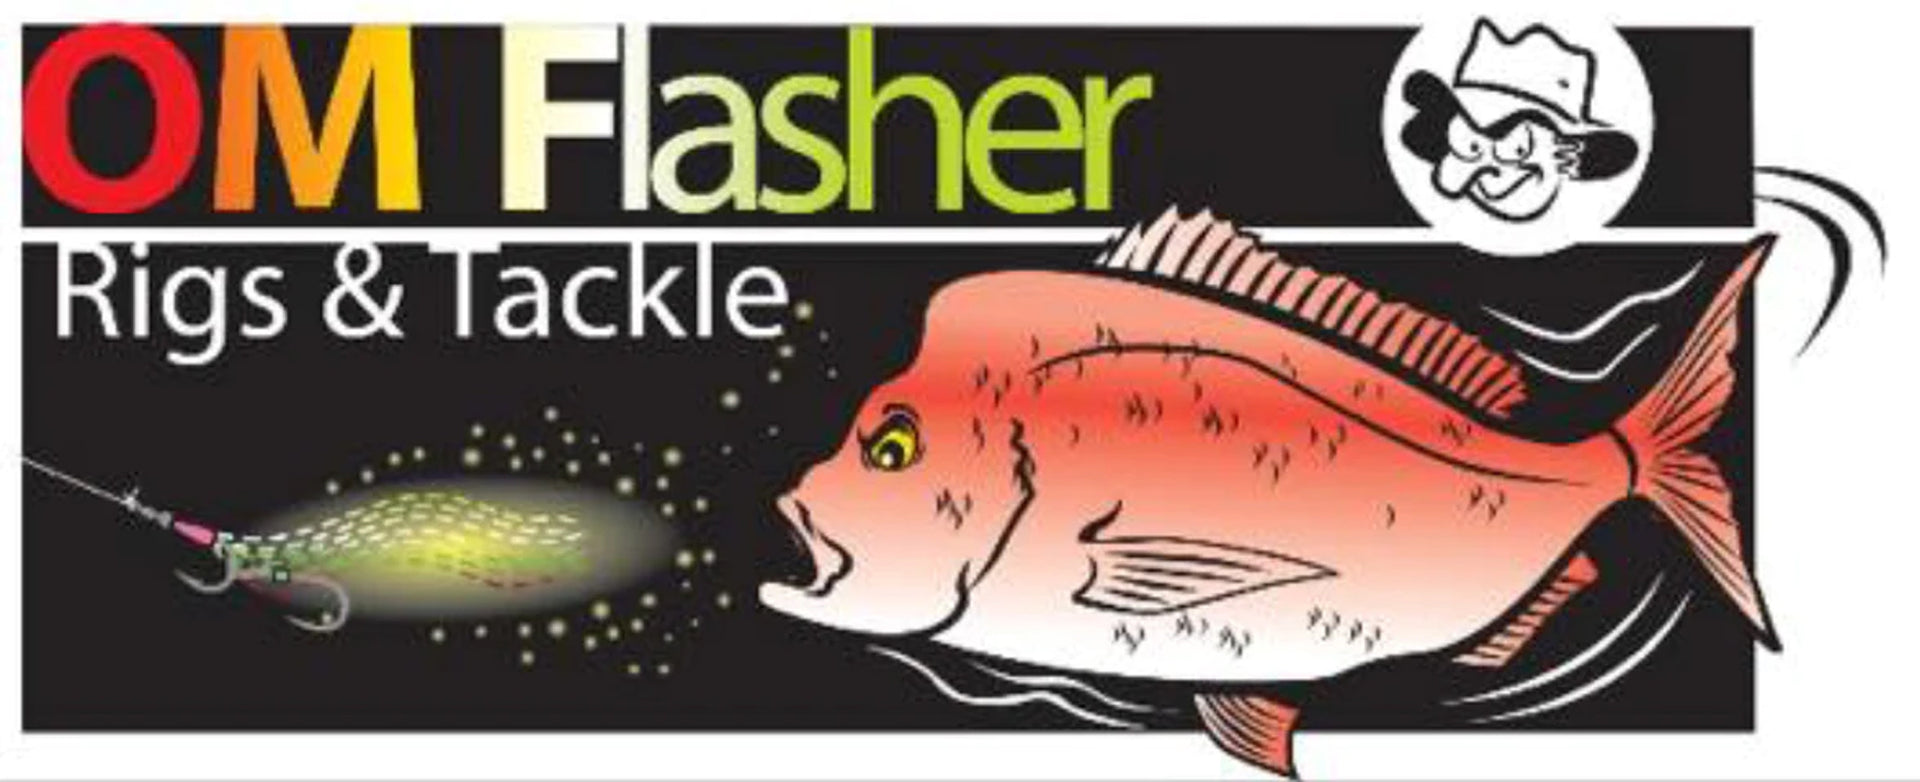 OM Flasher Rigs & Tackle